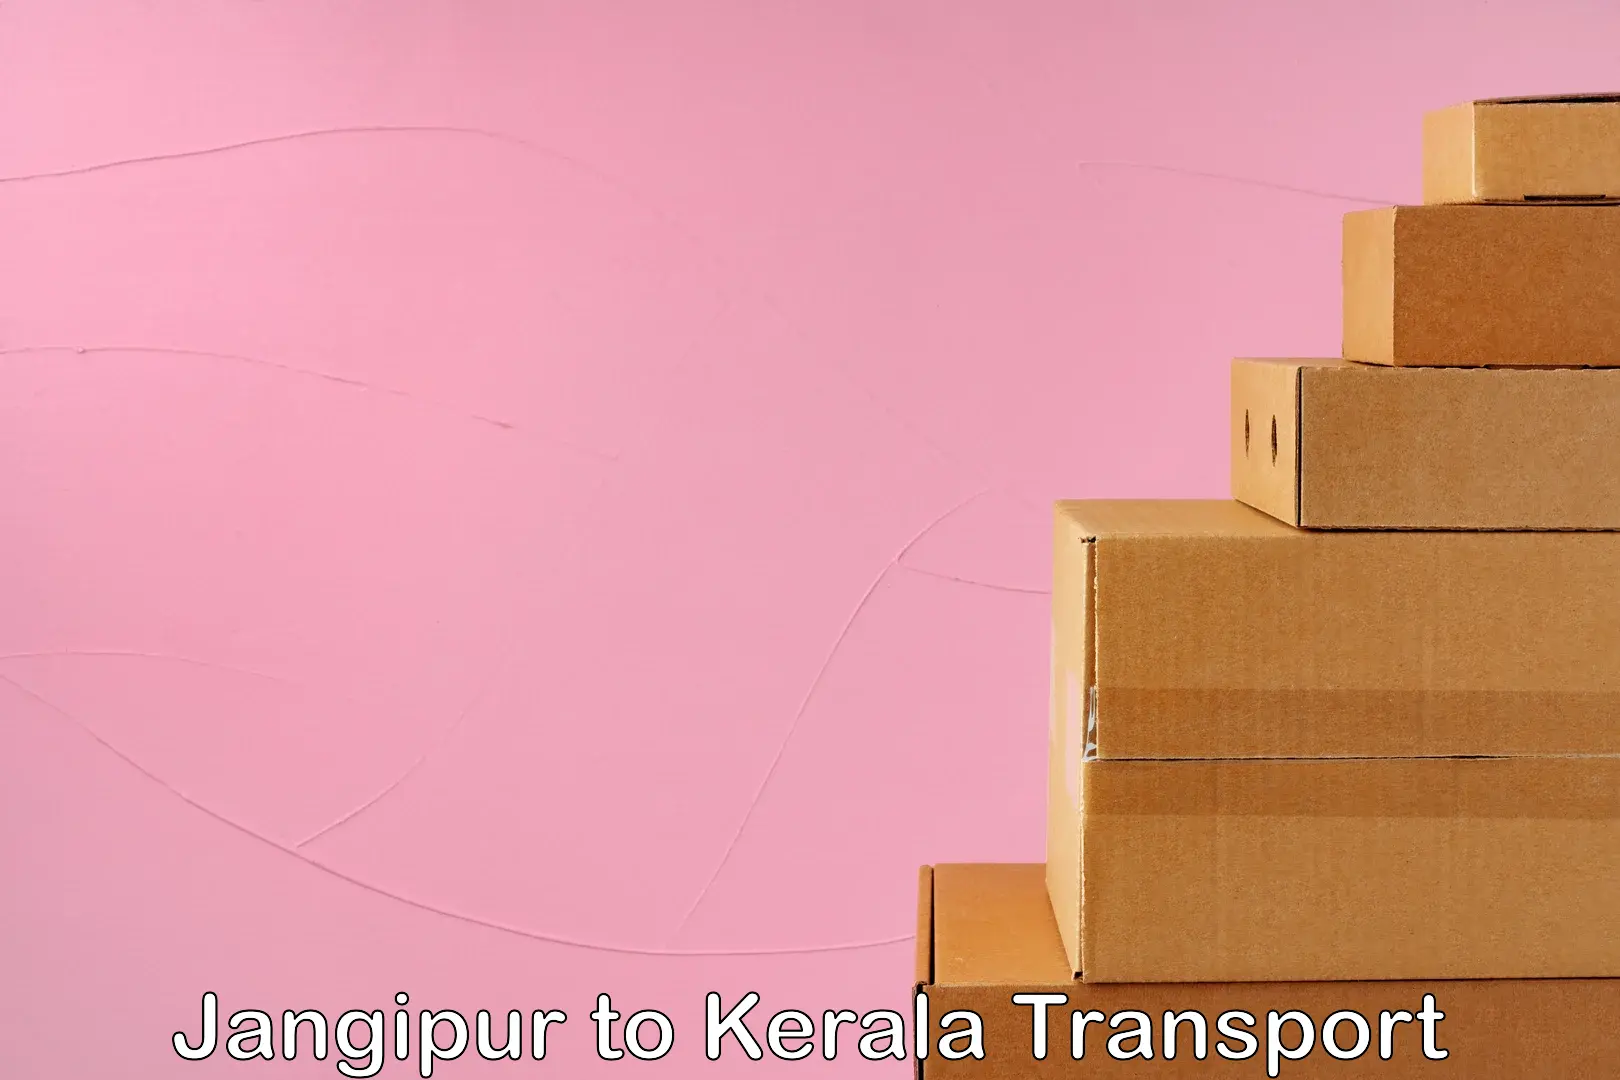 Cargo train transport services Jangipur to Cochin University of Science and Technology